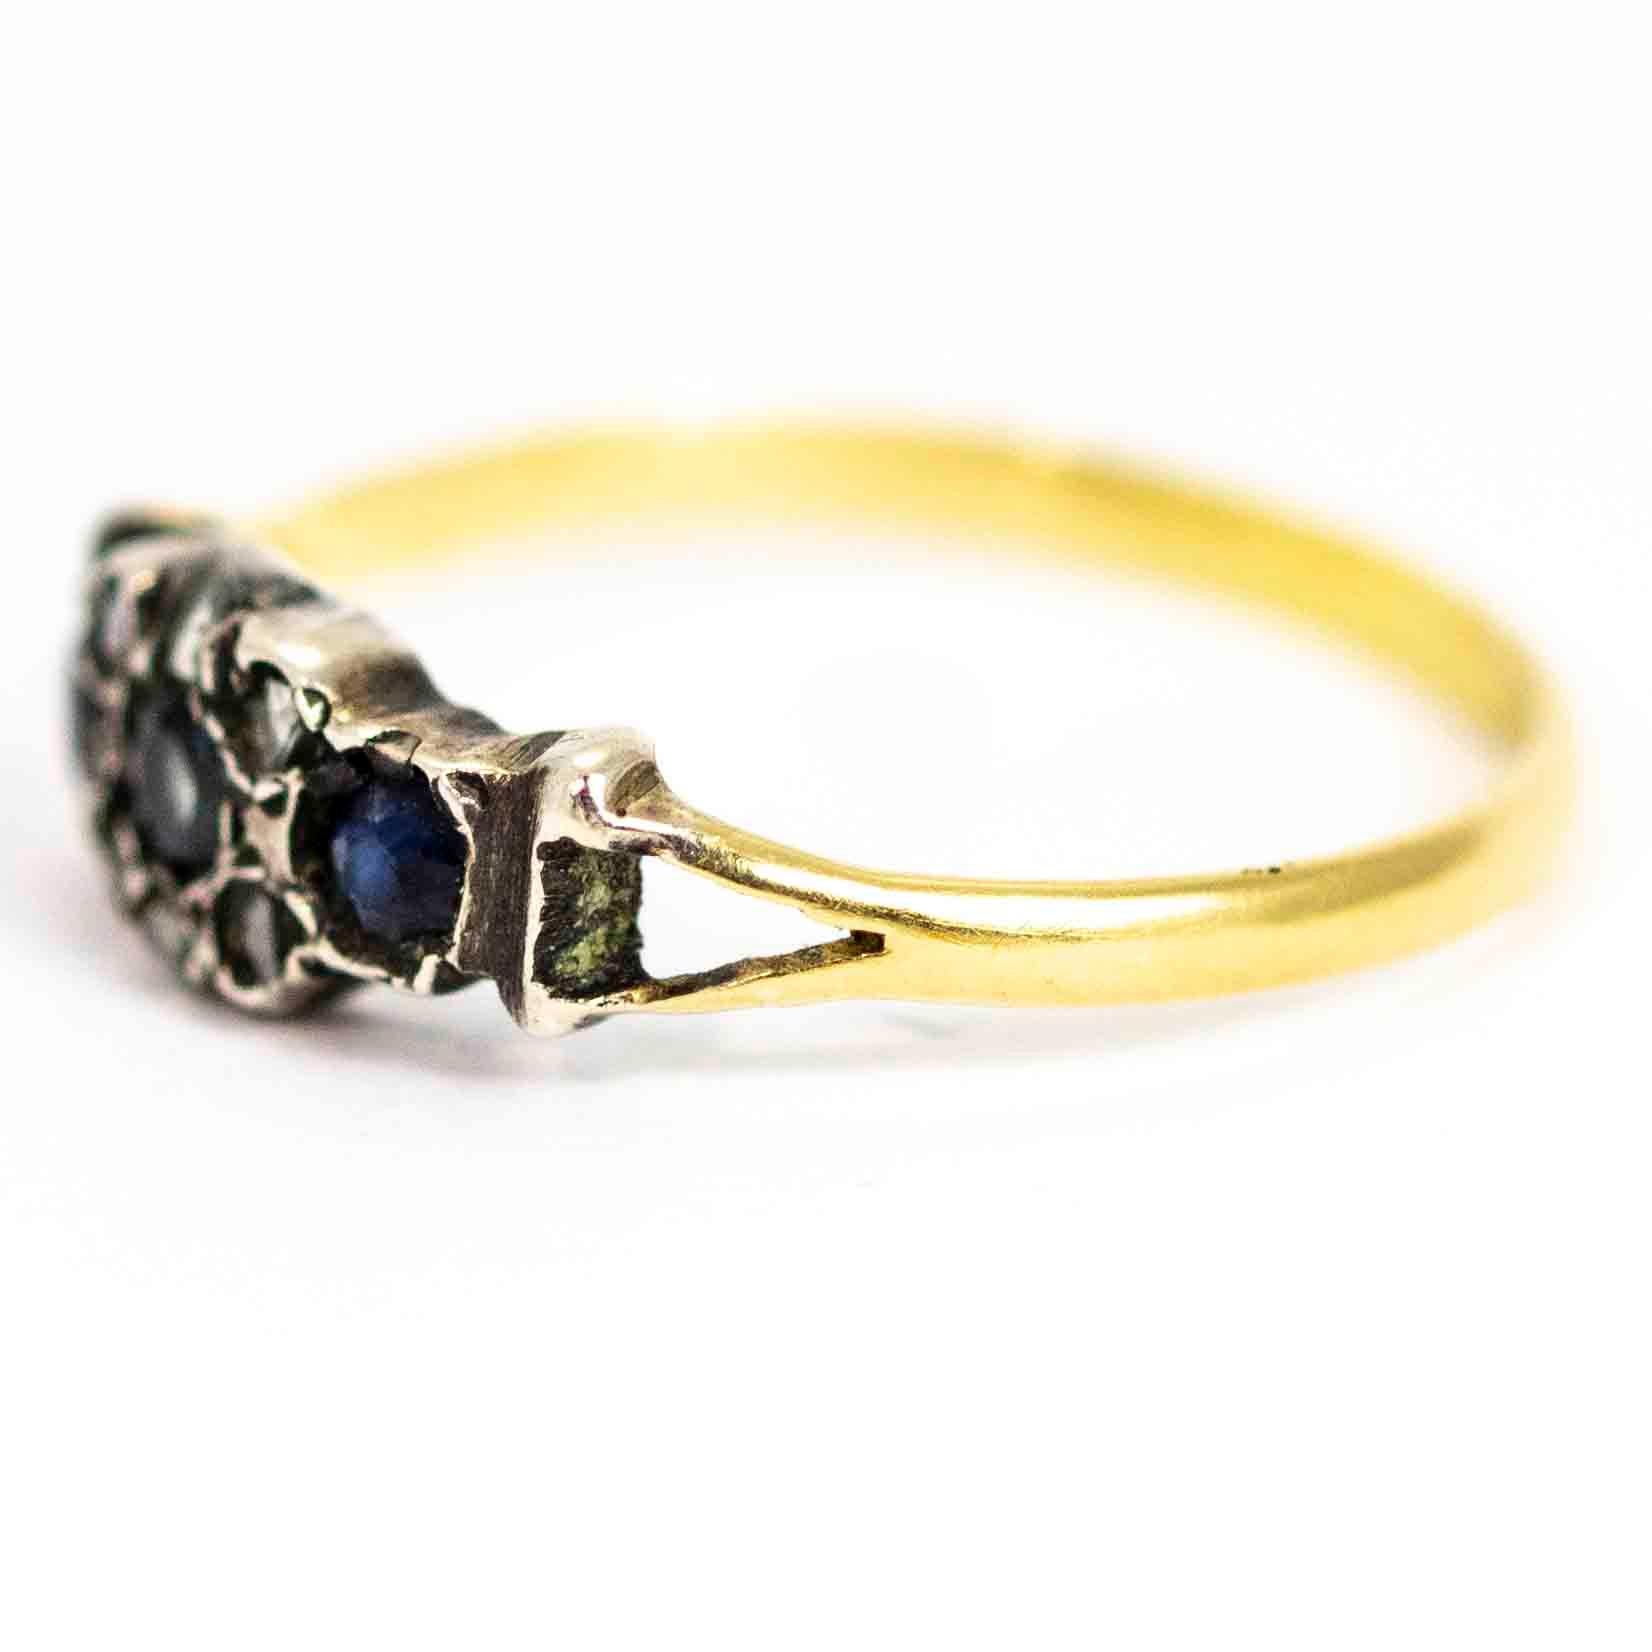 A stunning antique Georgian cluster ring. Set with three beautiful blue topaz and a halo of six rose cut diamonds. The wonderful cluster sits between elegant split shoulders. Modelled in 9 carat yellow gold.

Ring Size: UK L 1/2, US 6